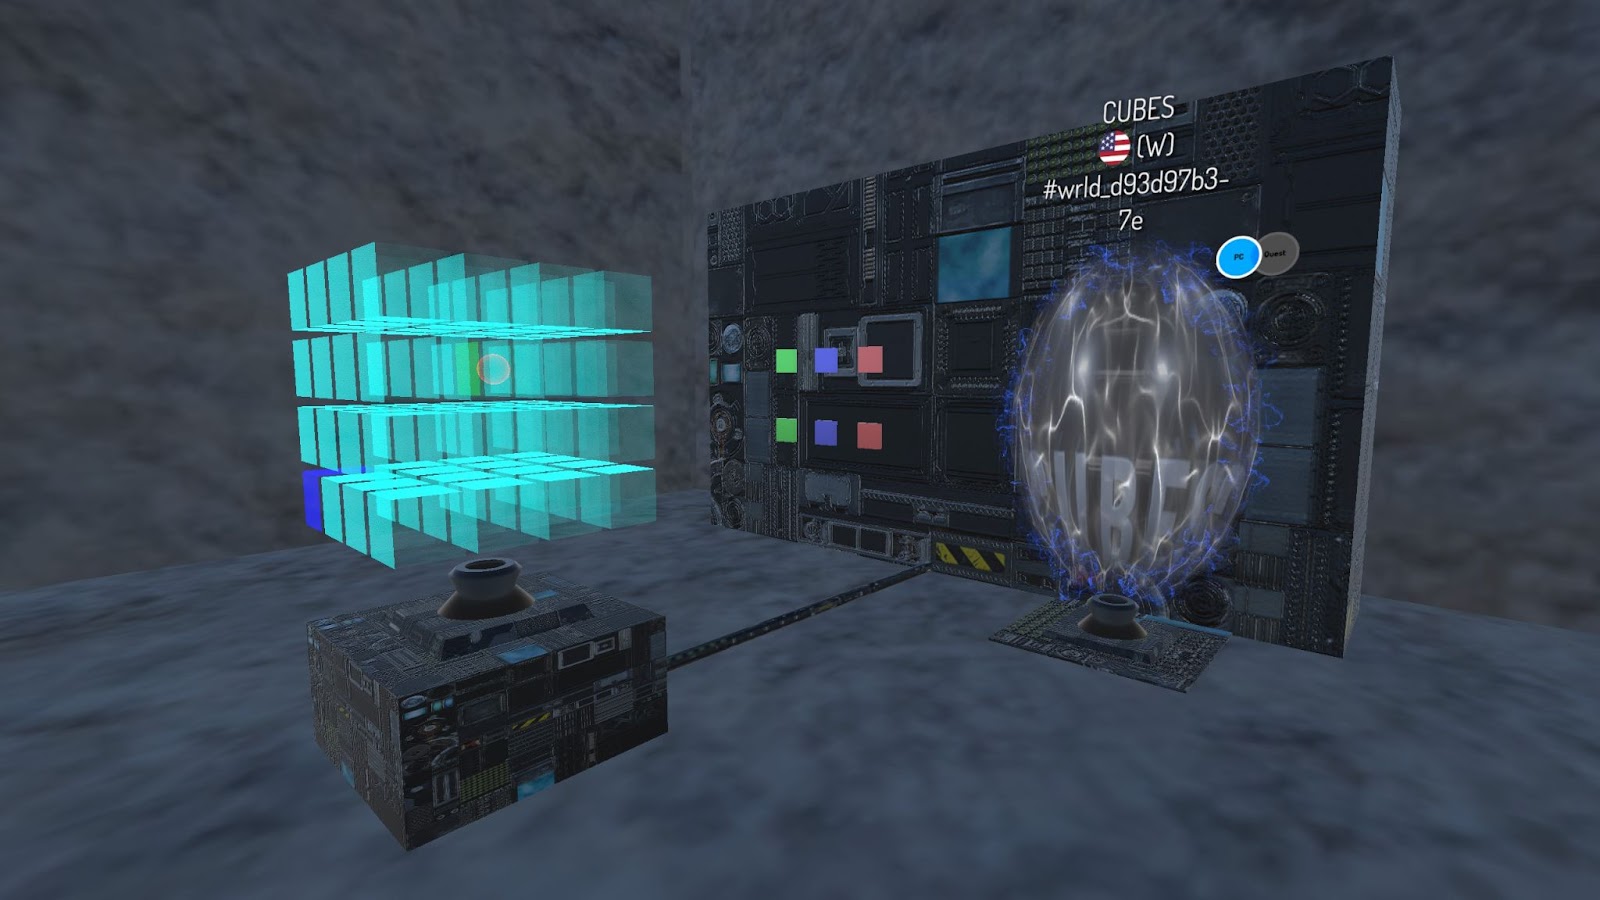 A model of the VRChat world CUBES being modeled inside of another world called The Silver Stronghold 2.0